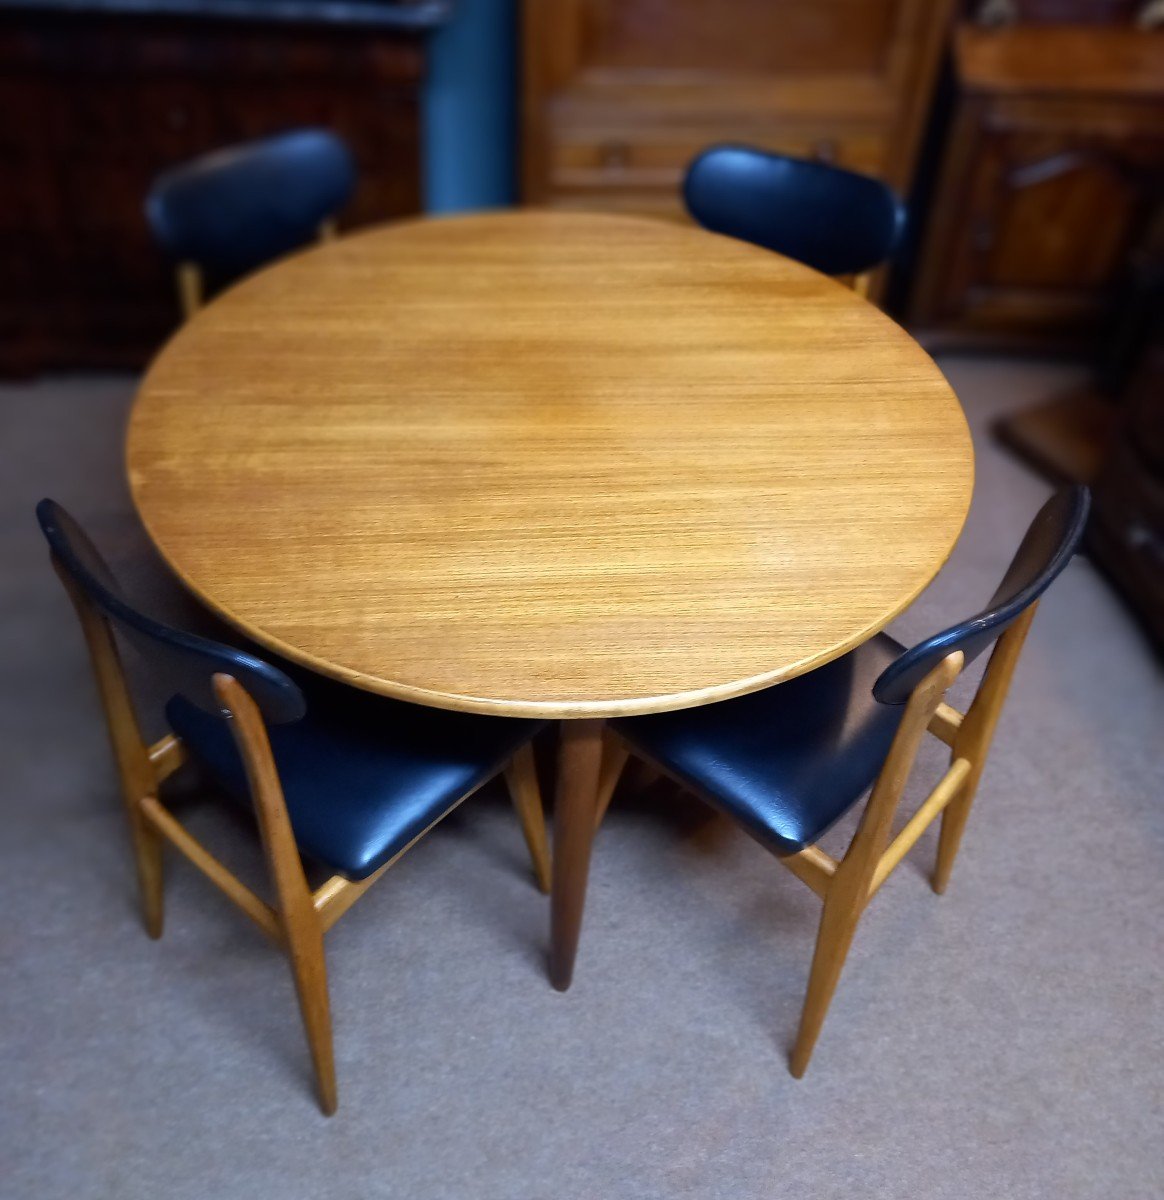 Danish Teak Table From The 70s